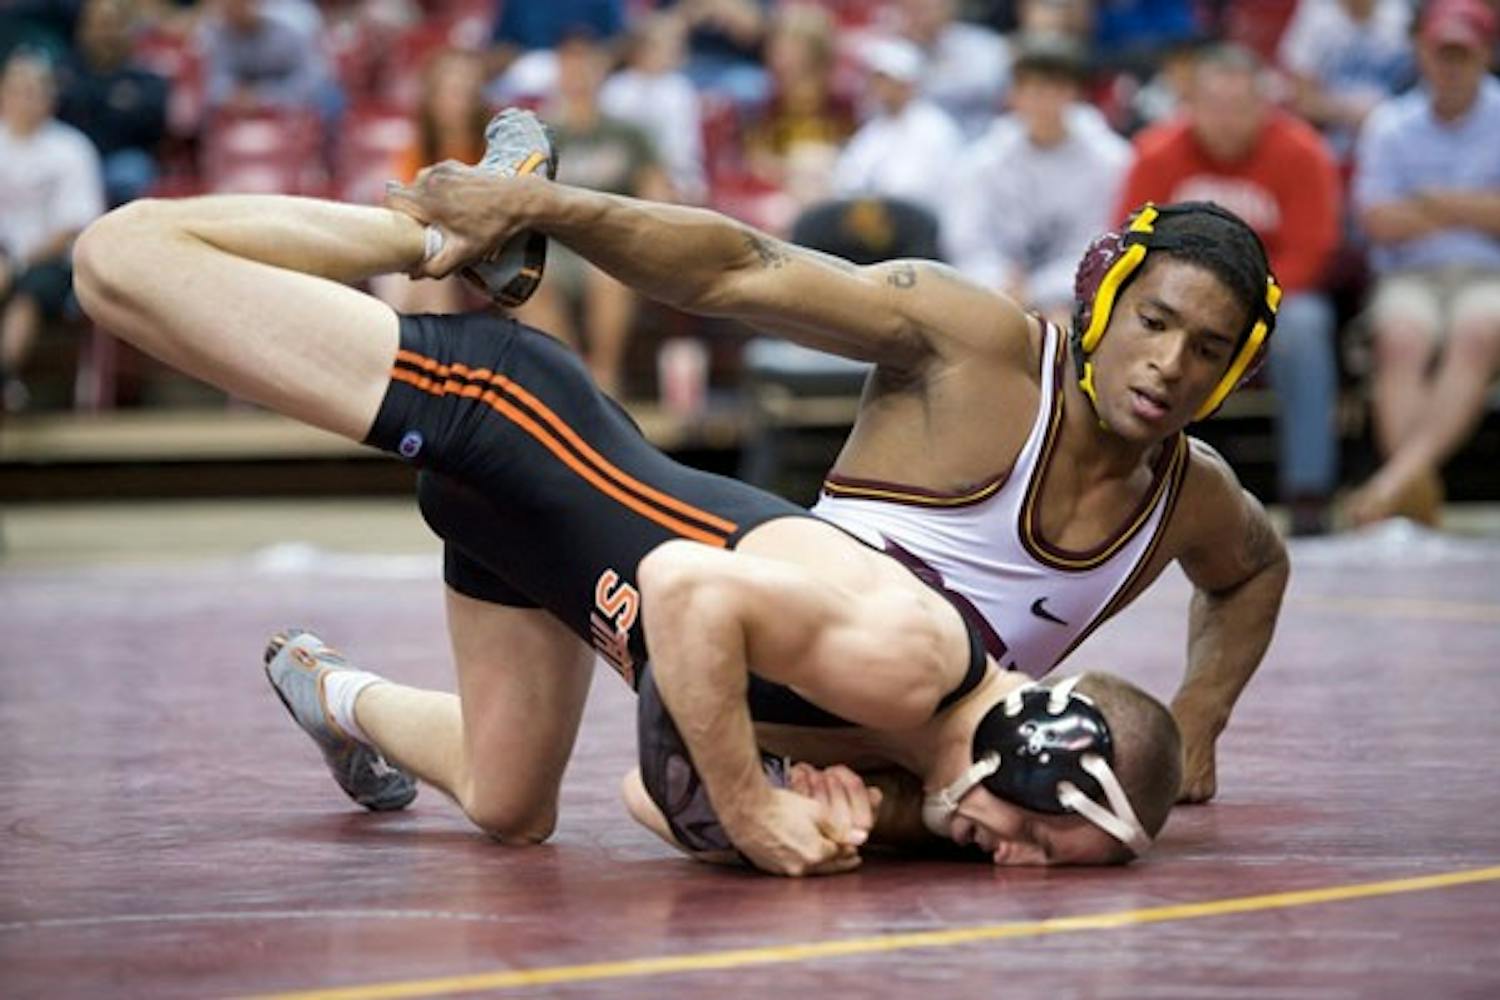 ALL-AMERICAN BOY: ASU junior Anthony Robles placed seventh at the NCAA Championships in Omaha, Neb. over the weekend, earning All-American status for the second straight year. (Photo by Michael Arellano)